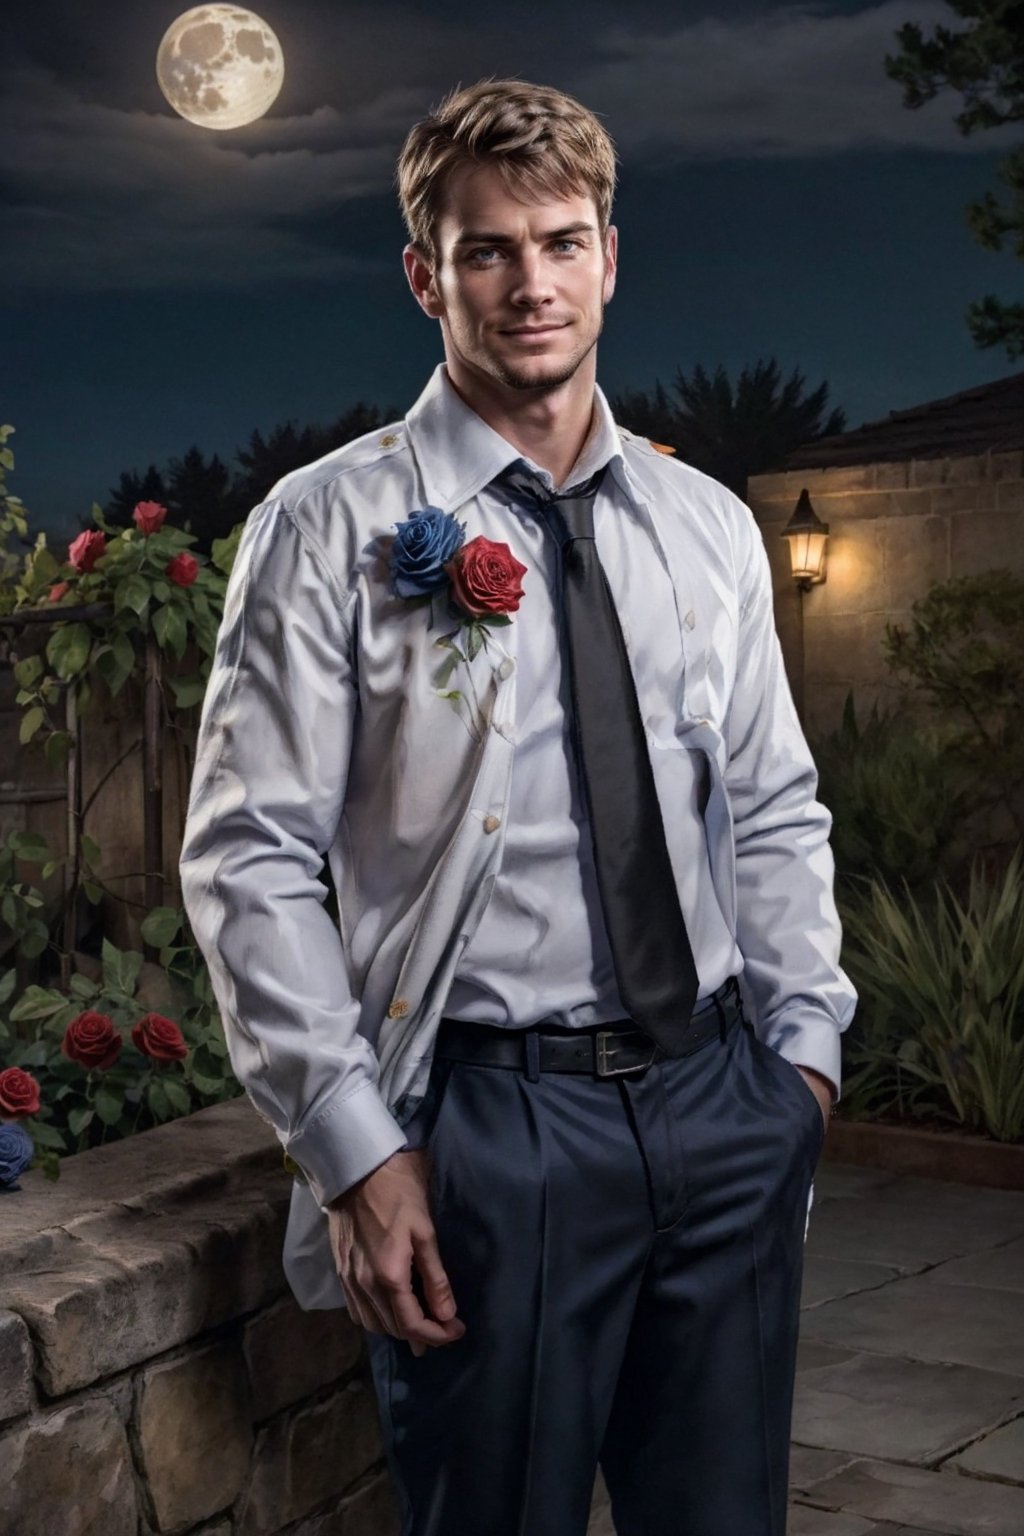 (1 image only), solo male,Kyle Hyde, detective, depict an image of a man who looks like "Kyle Hyde" in a garden of blue roses during nighttime waiting for someone for a secret romantic date, standing under a rose arch, white collared shirt and black necktie, mature, manly, masculine,  confidence, charming, alluring, romantic, mischievous smile, looking at viewer, perfect anatomy, perfect proportions, 8k, HQ, (best quality:1.5, hyperrealistic:1.5, photorealistic:1.4, madly detailed CG unity 8k wallpaper:1.5, masterpiece:1.3, madly detailed photo:1.2), (hyper-realistic lifelike texture:1.4, realistic eyes:1.2), picture-perfect face, perfect eye pupil, detailed eyes, perfecteyes, mature, 40 years old, outside, nighttime, starry sky in the background, moon shines above, in a garden of blue flowers (roses), flower4rmor,kyle_hyde